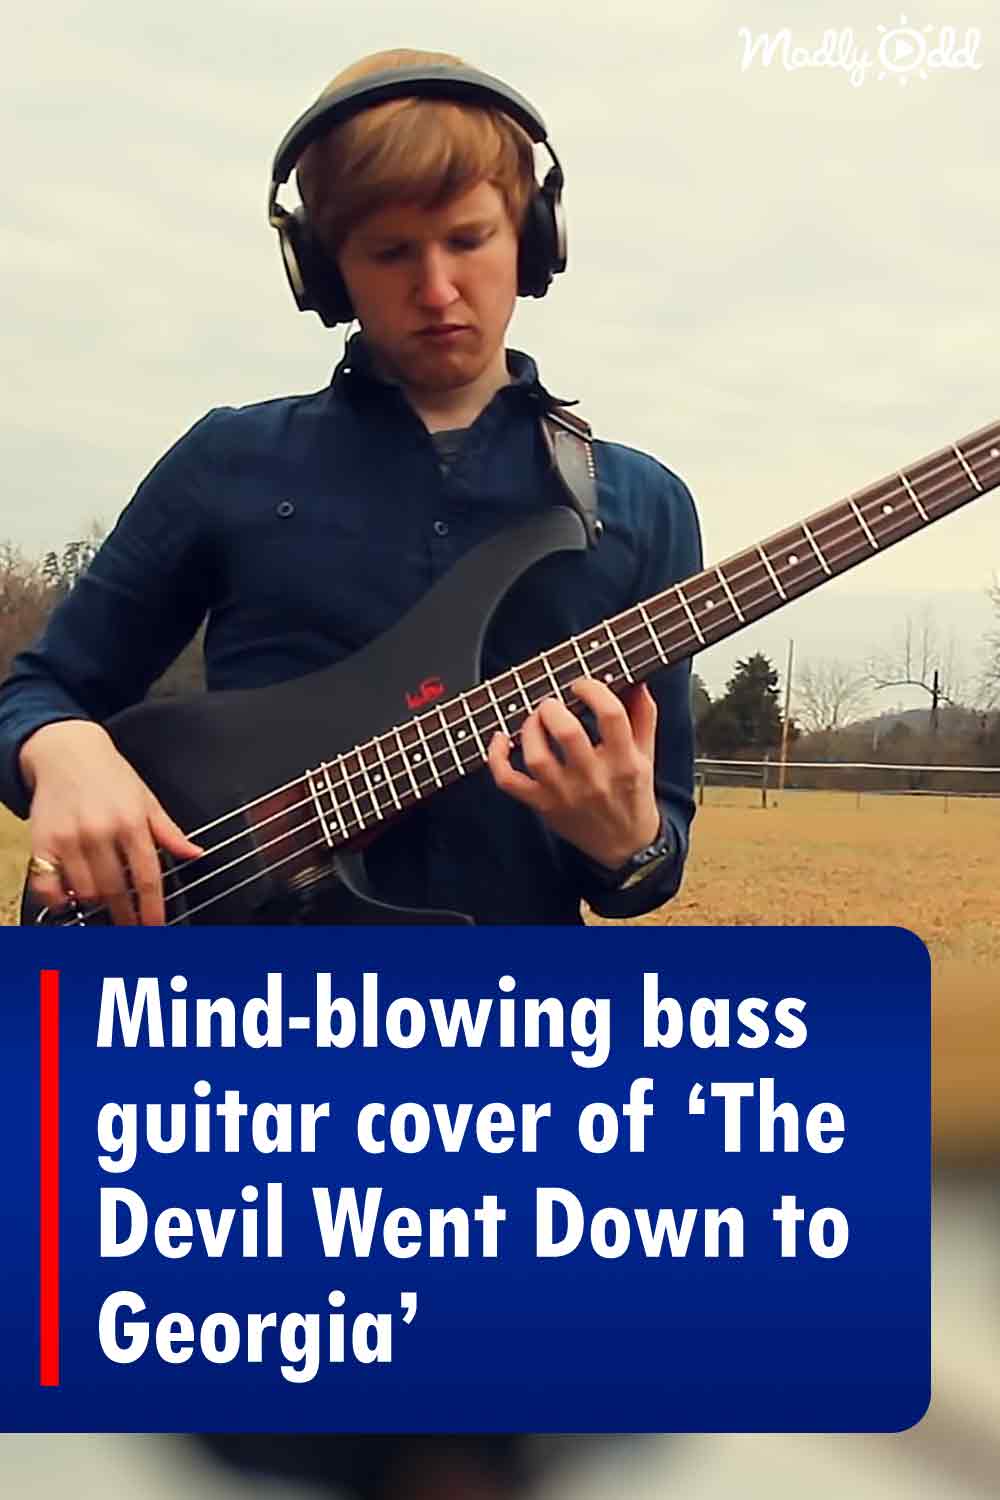 Mind-blowing bass guitar cover of ‘The Devil Went Down to Georgia’